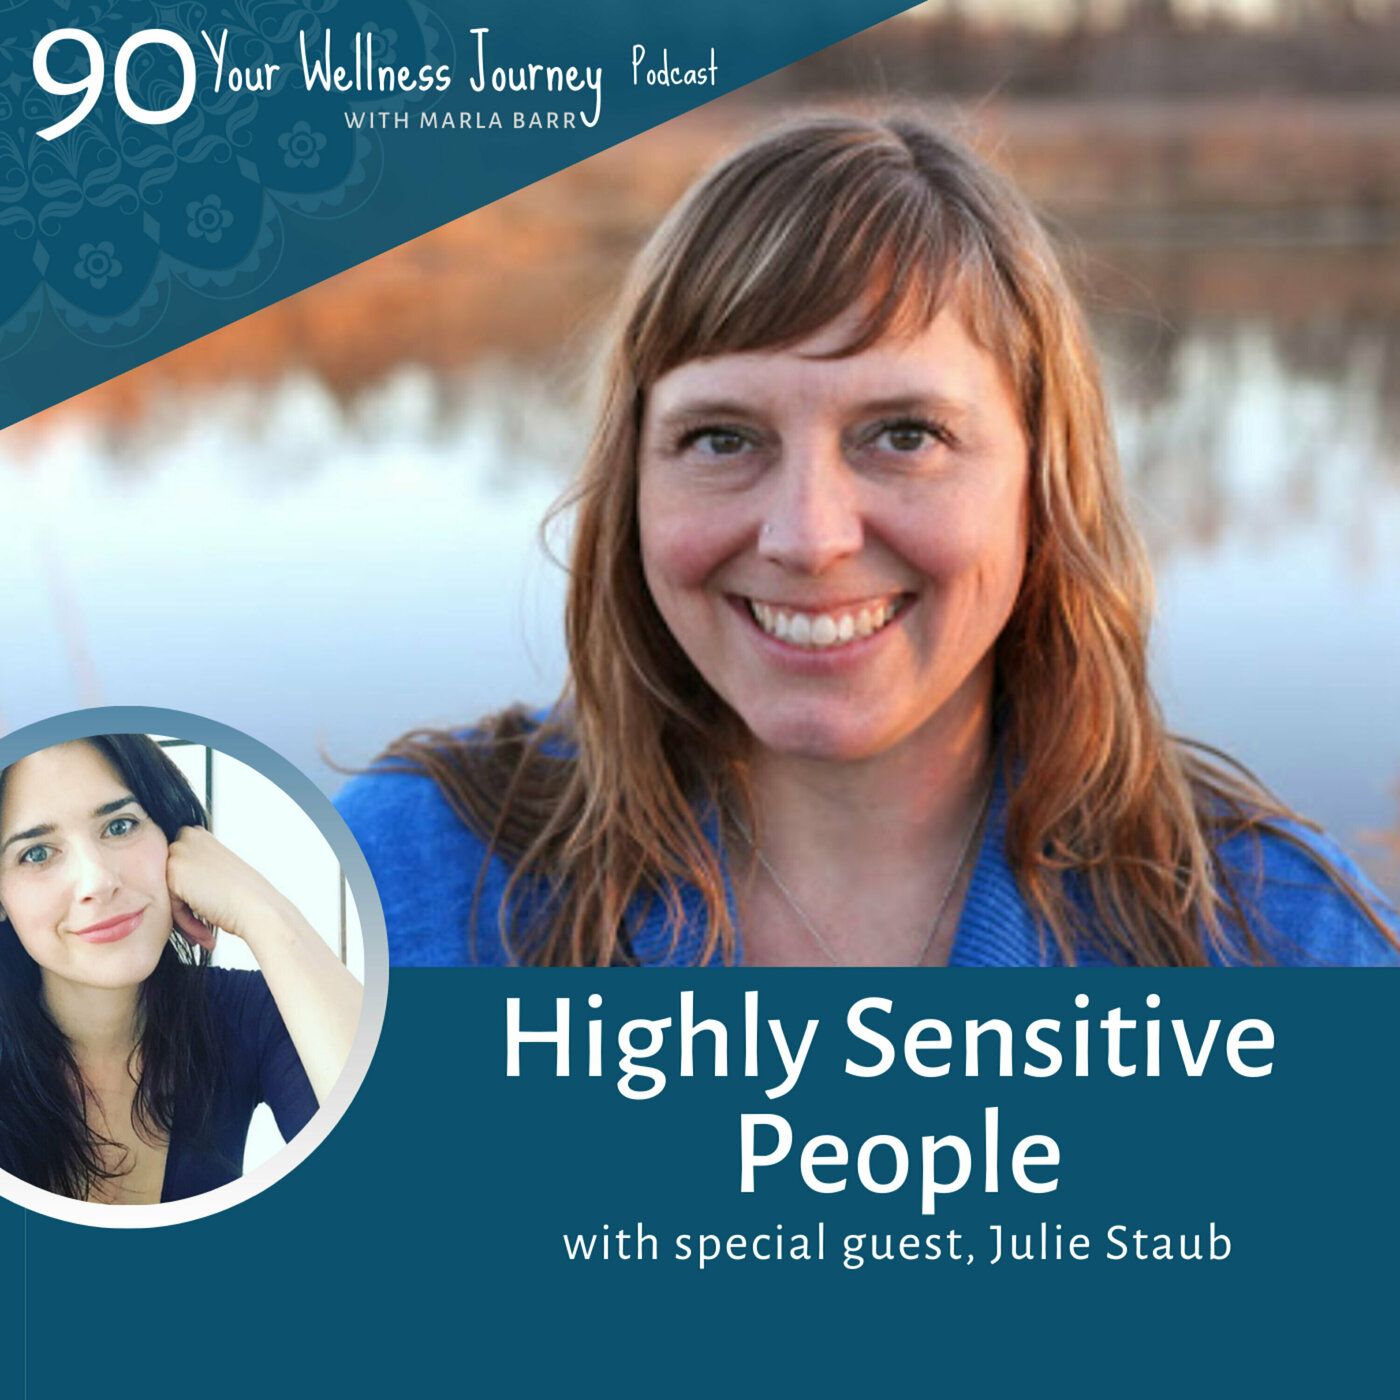 Are you a Highly Sensitive Person (HSP) with Julie Staub